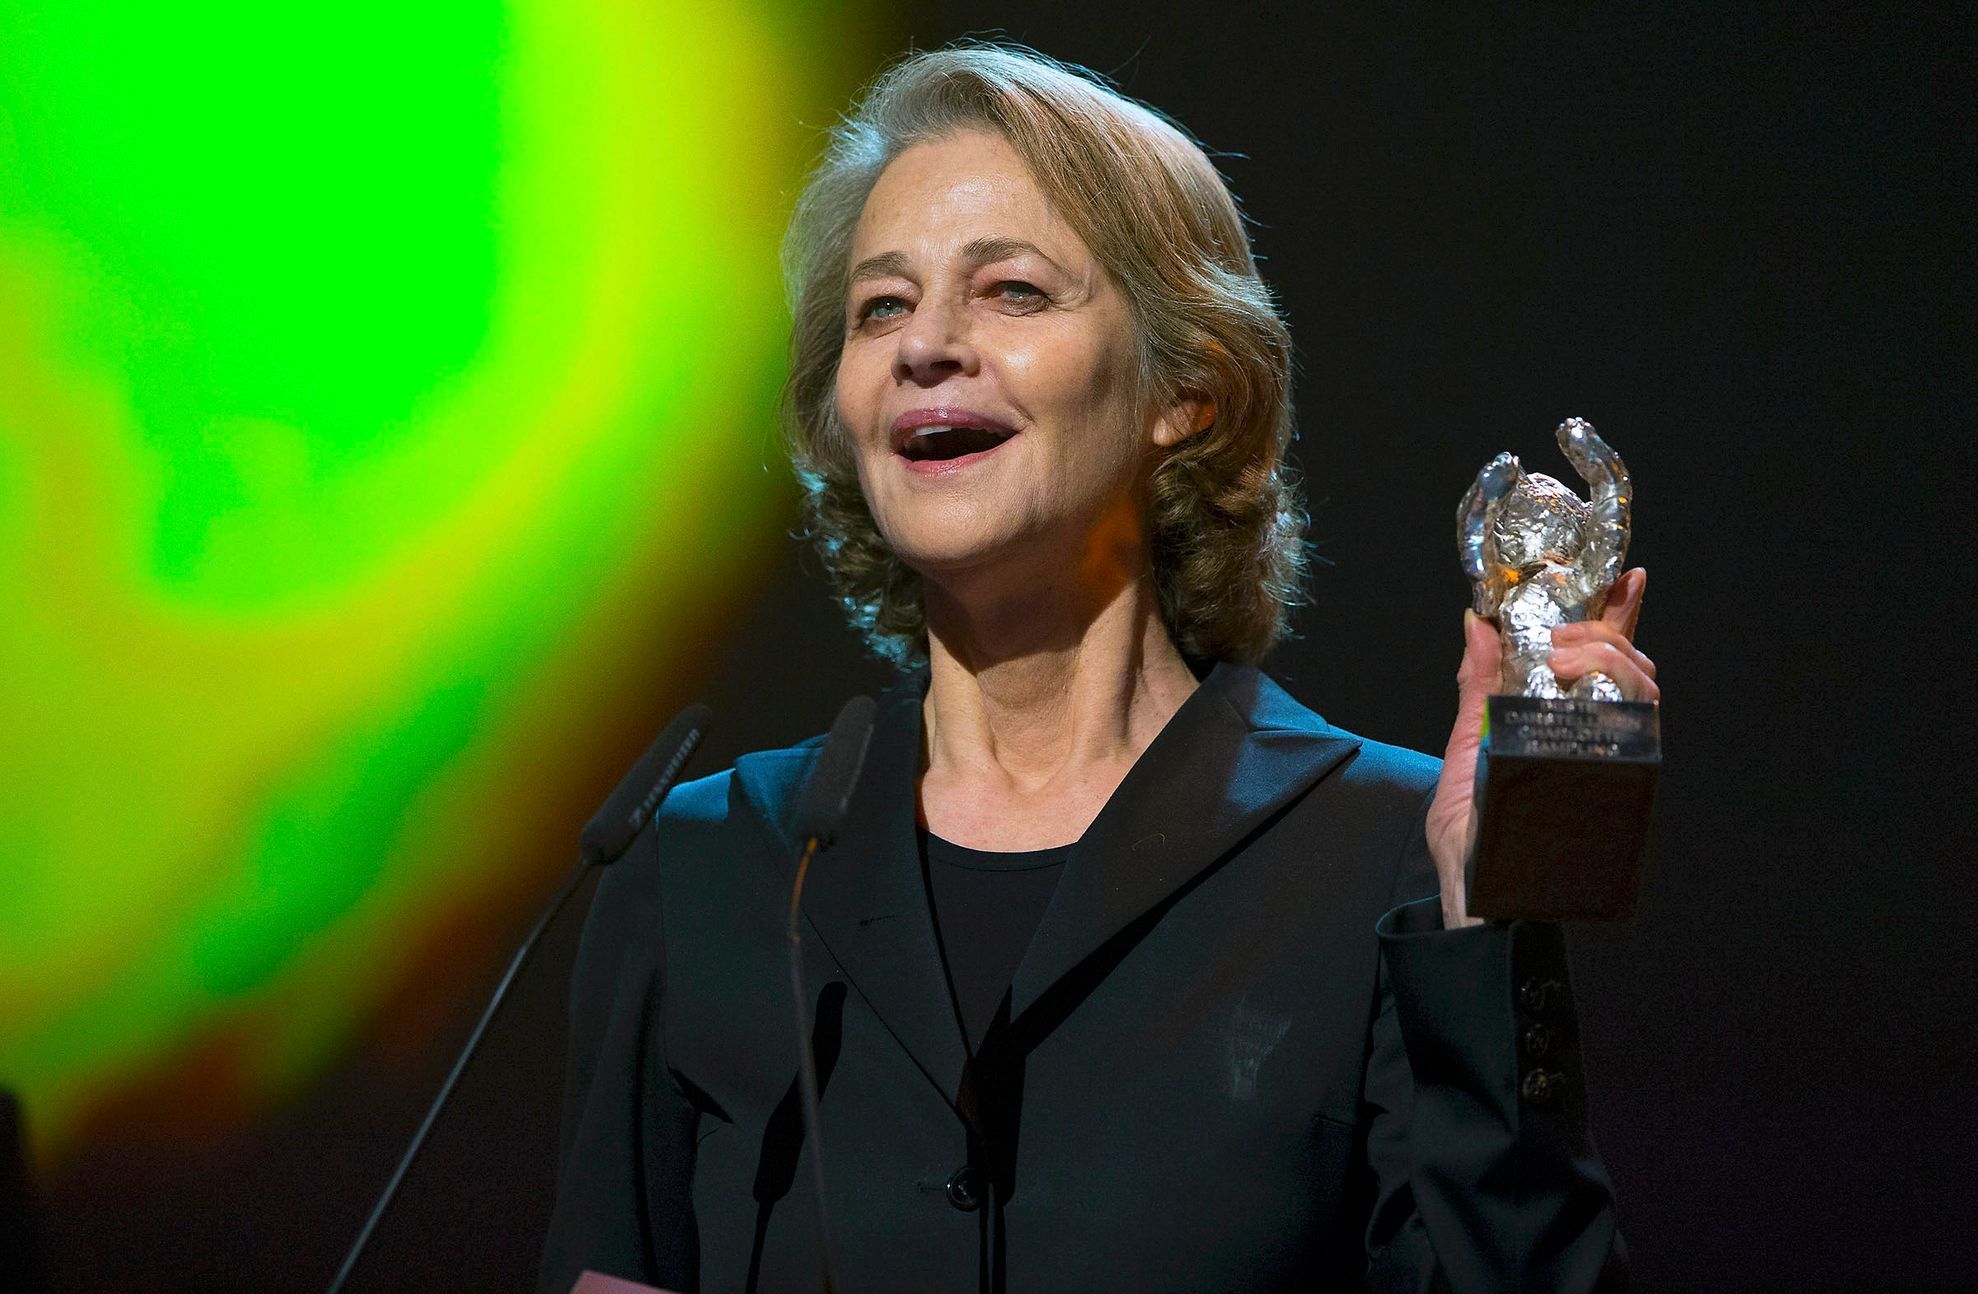 Actress Rampling holds her Silver Bear for Best Actress for the film '45 Years' at the awards ceremony of the 65th Berlinale International Film Festival in Berlin